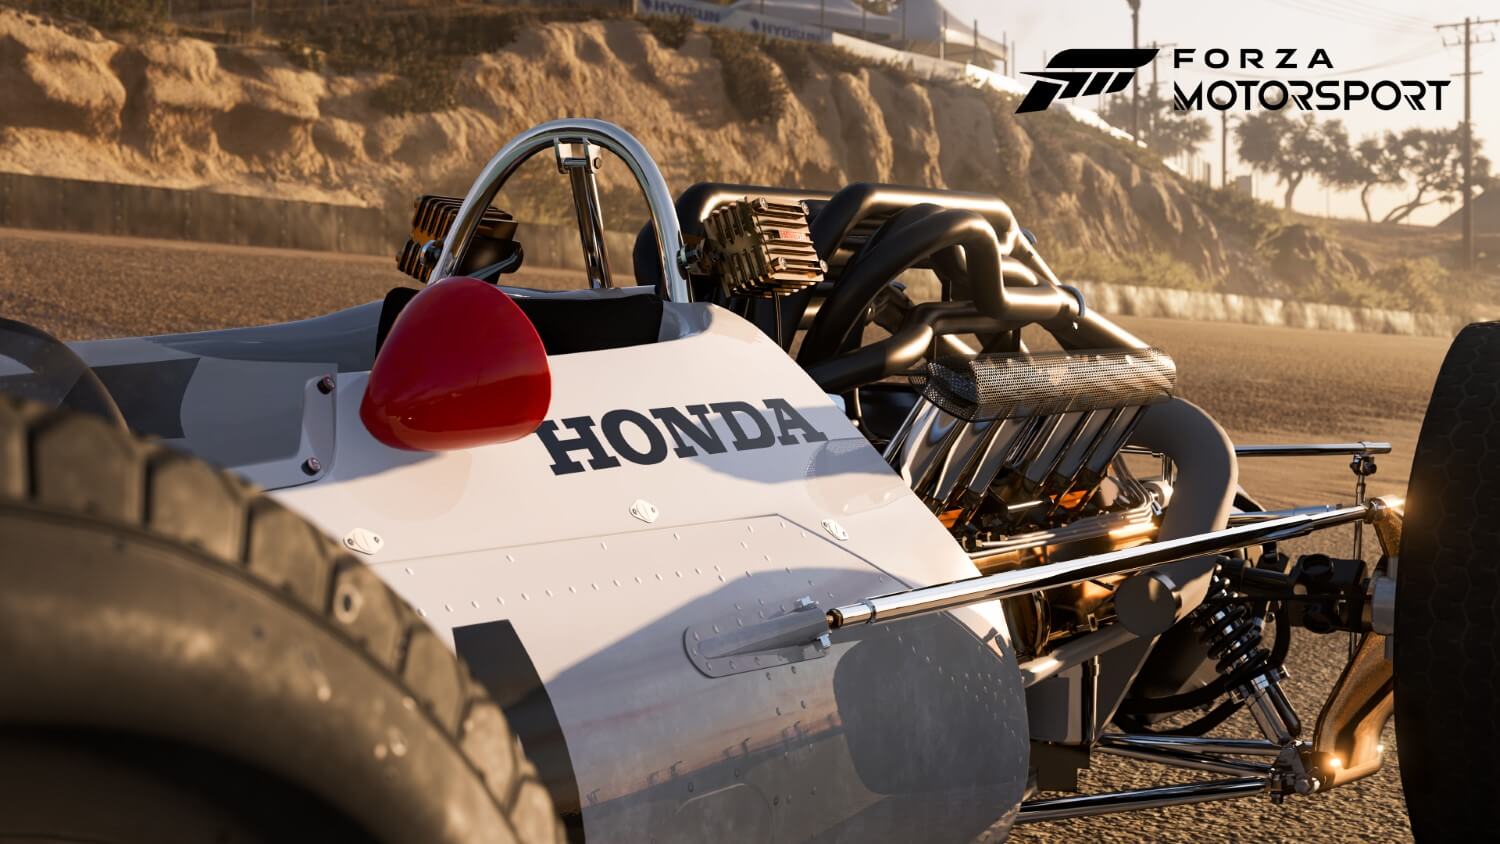 Digital Foundry conducted a gameplay analysis of the new Forza Motorsport